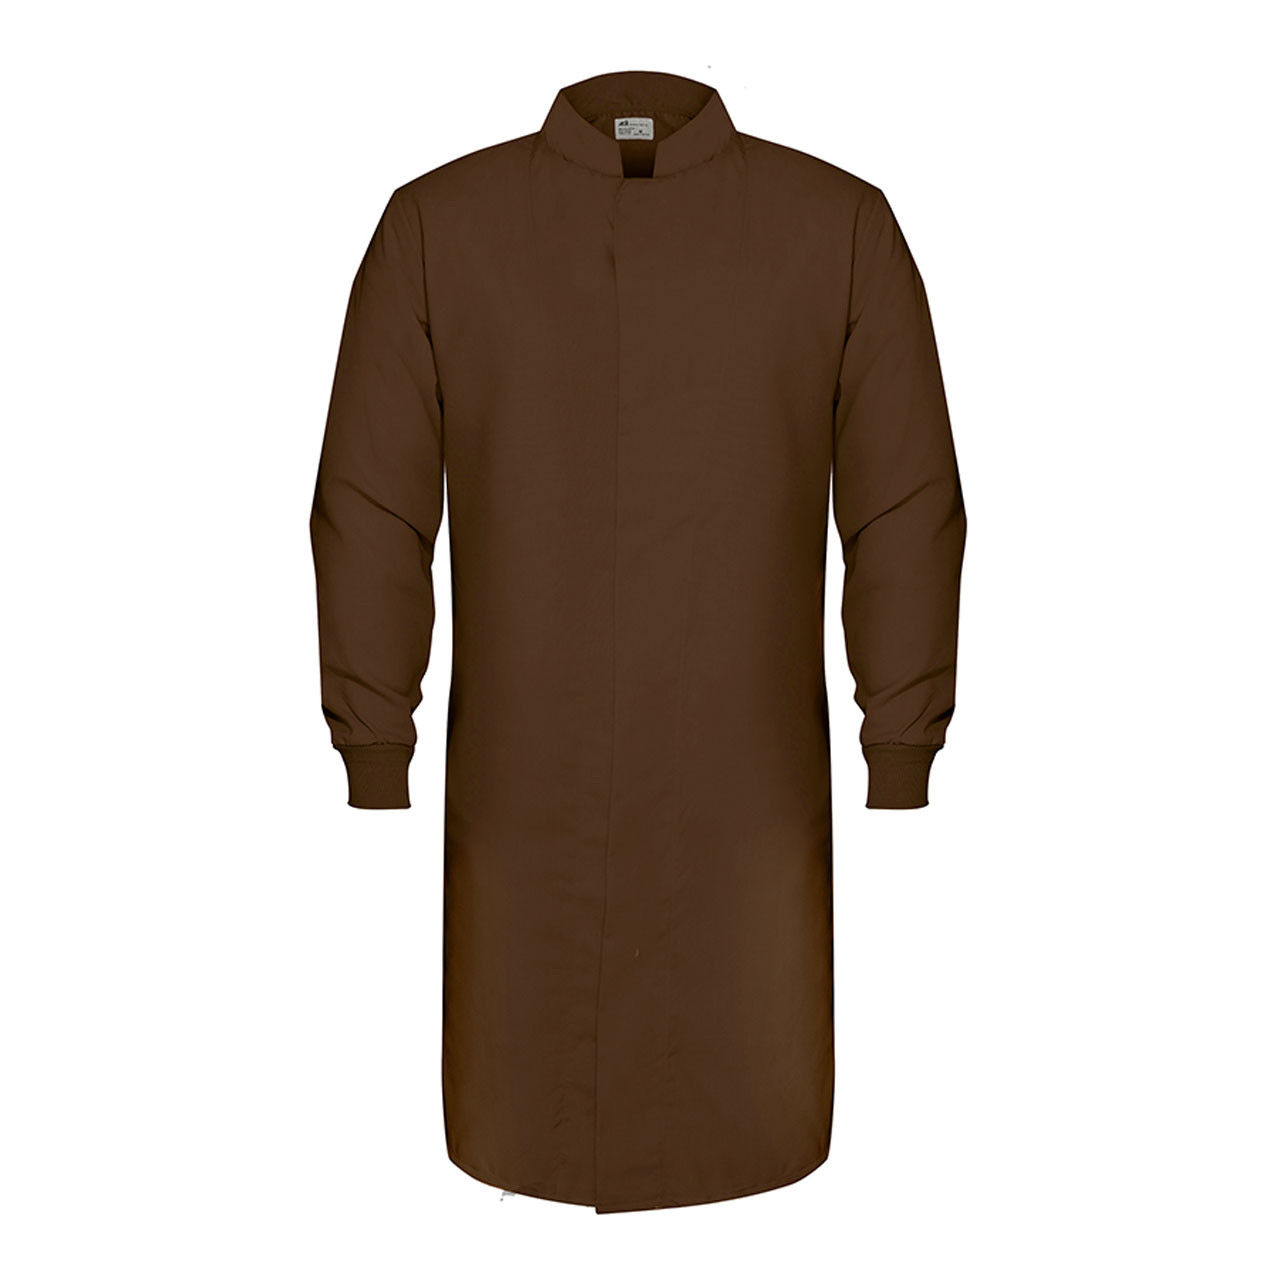 Is this brown lab coat washable and reusable?